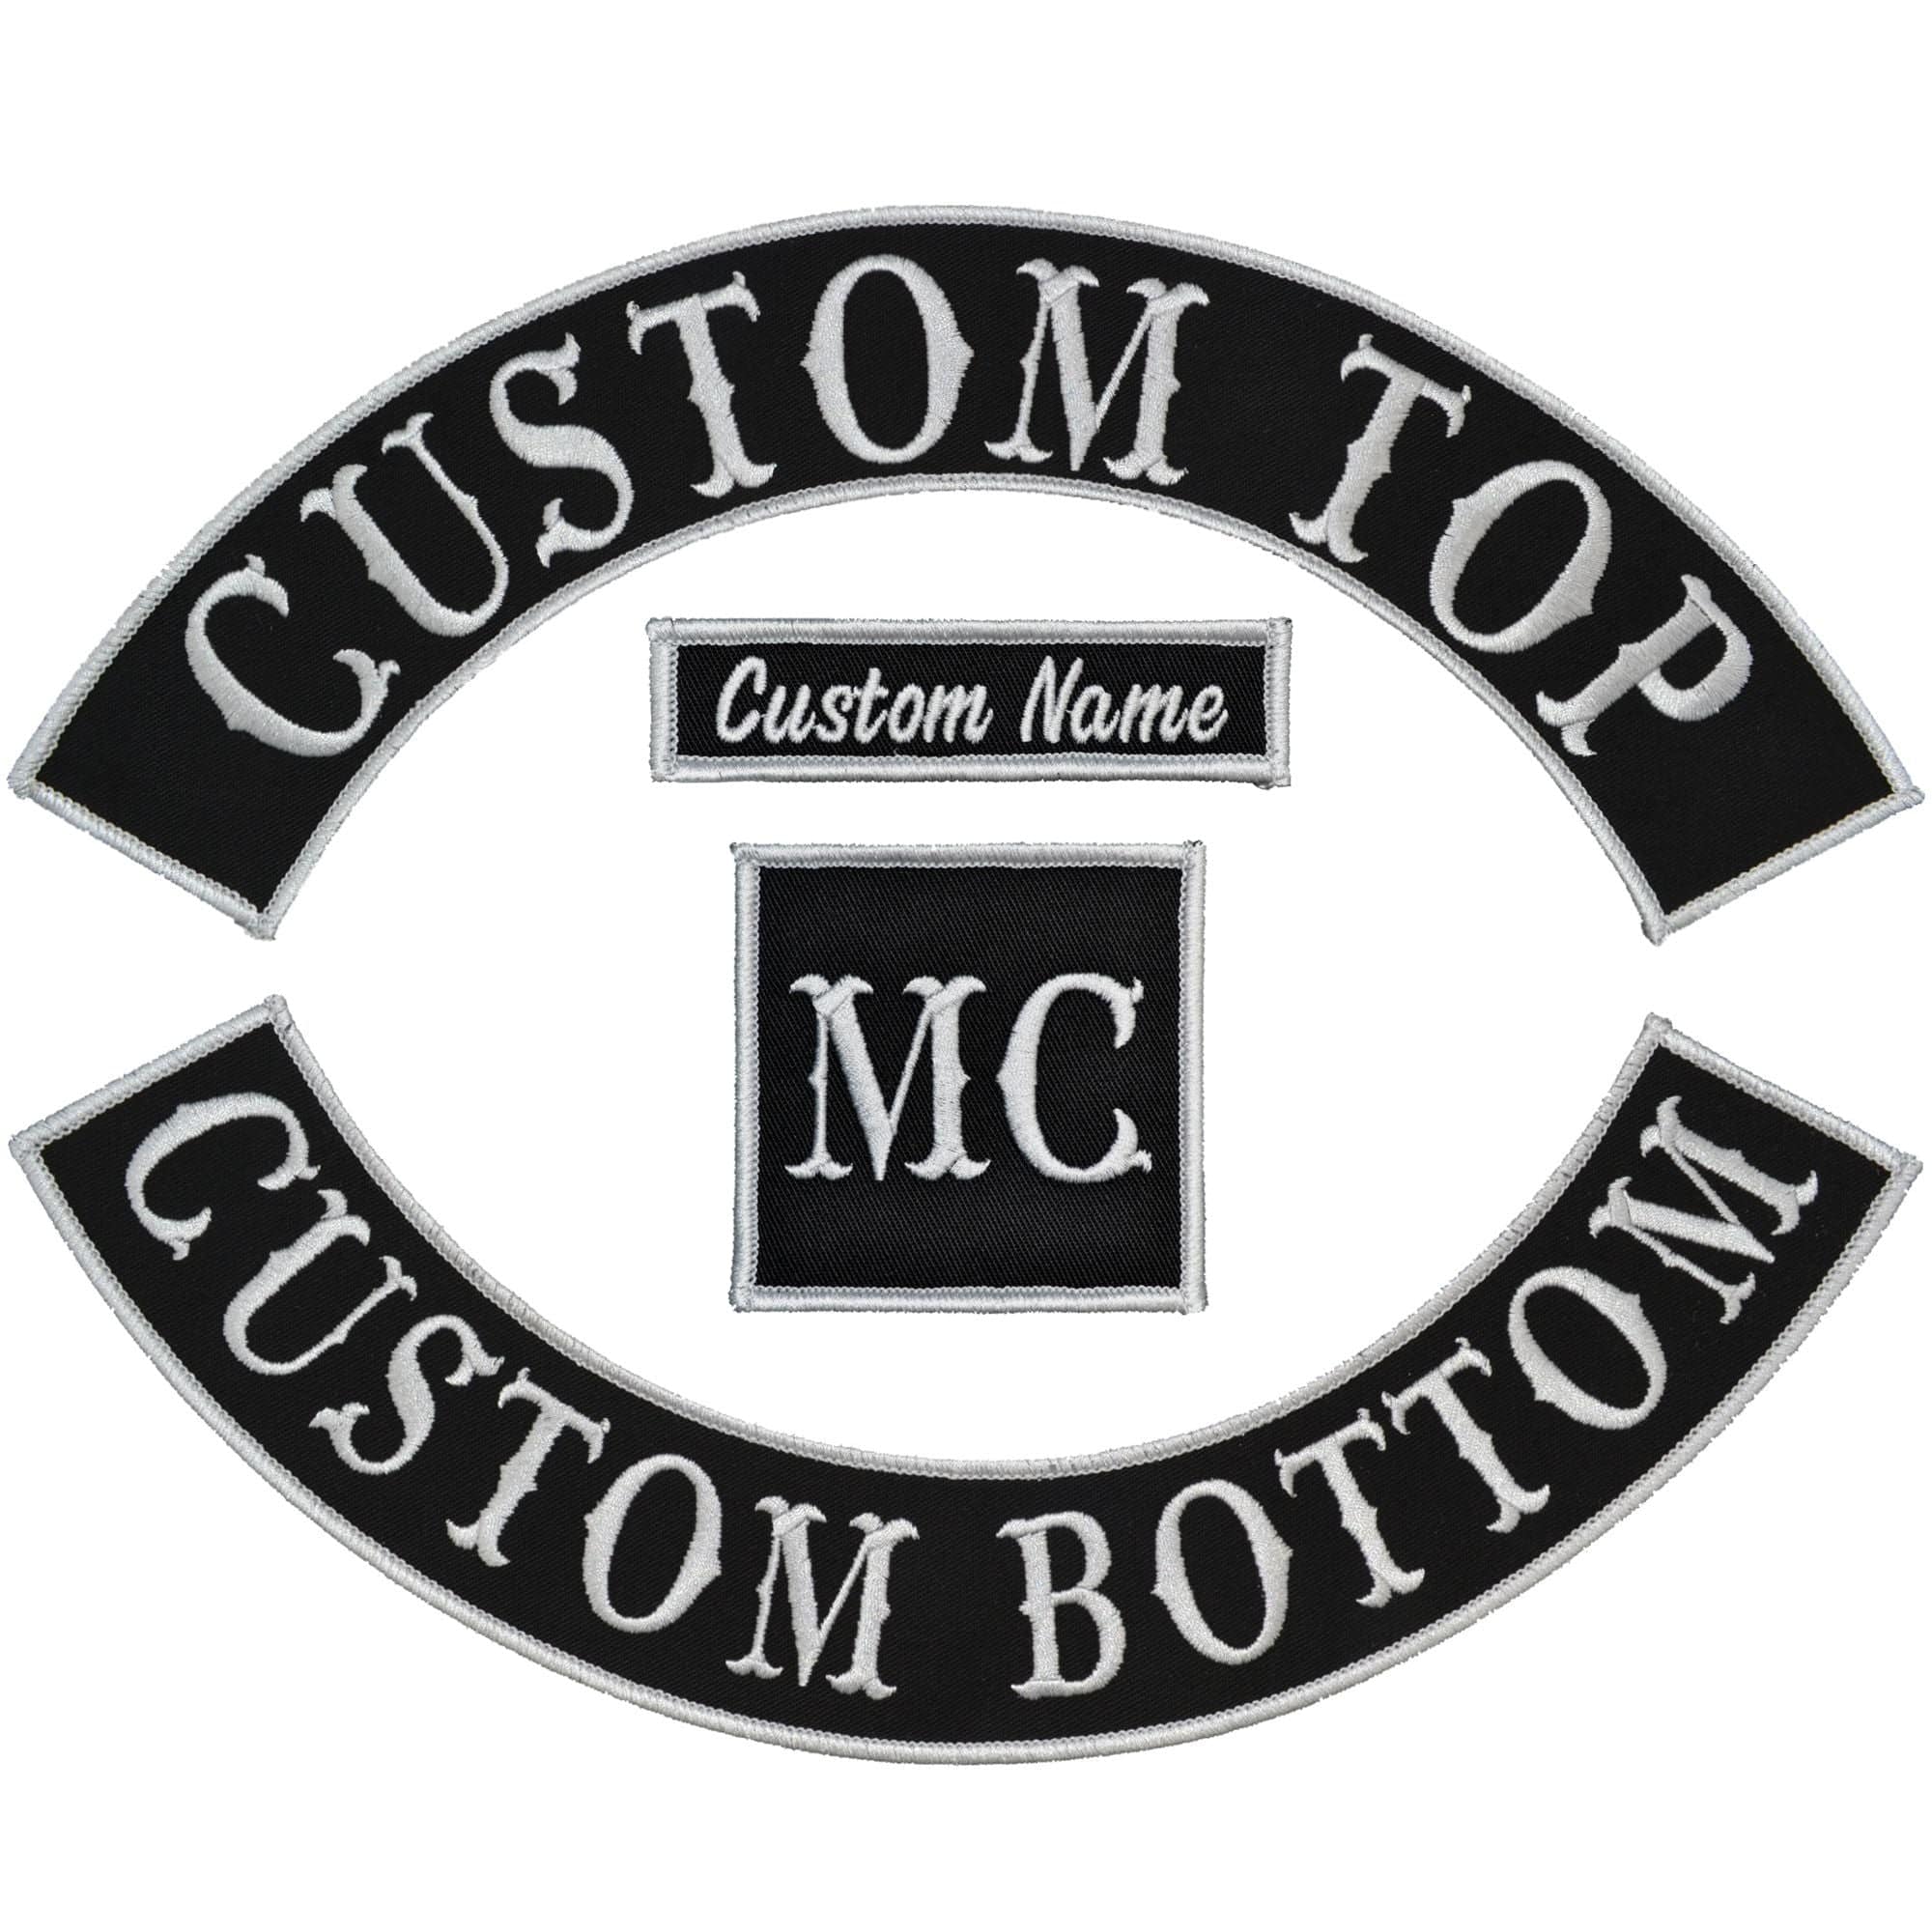 Large Custom Embroidered Patch for Biker Vest, Custom Embroidery